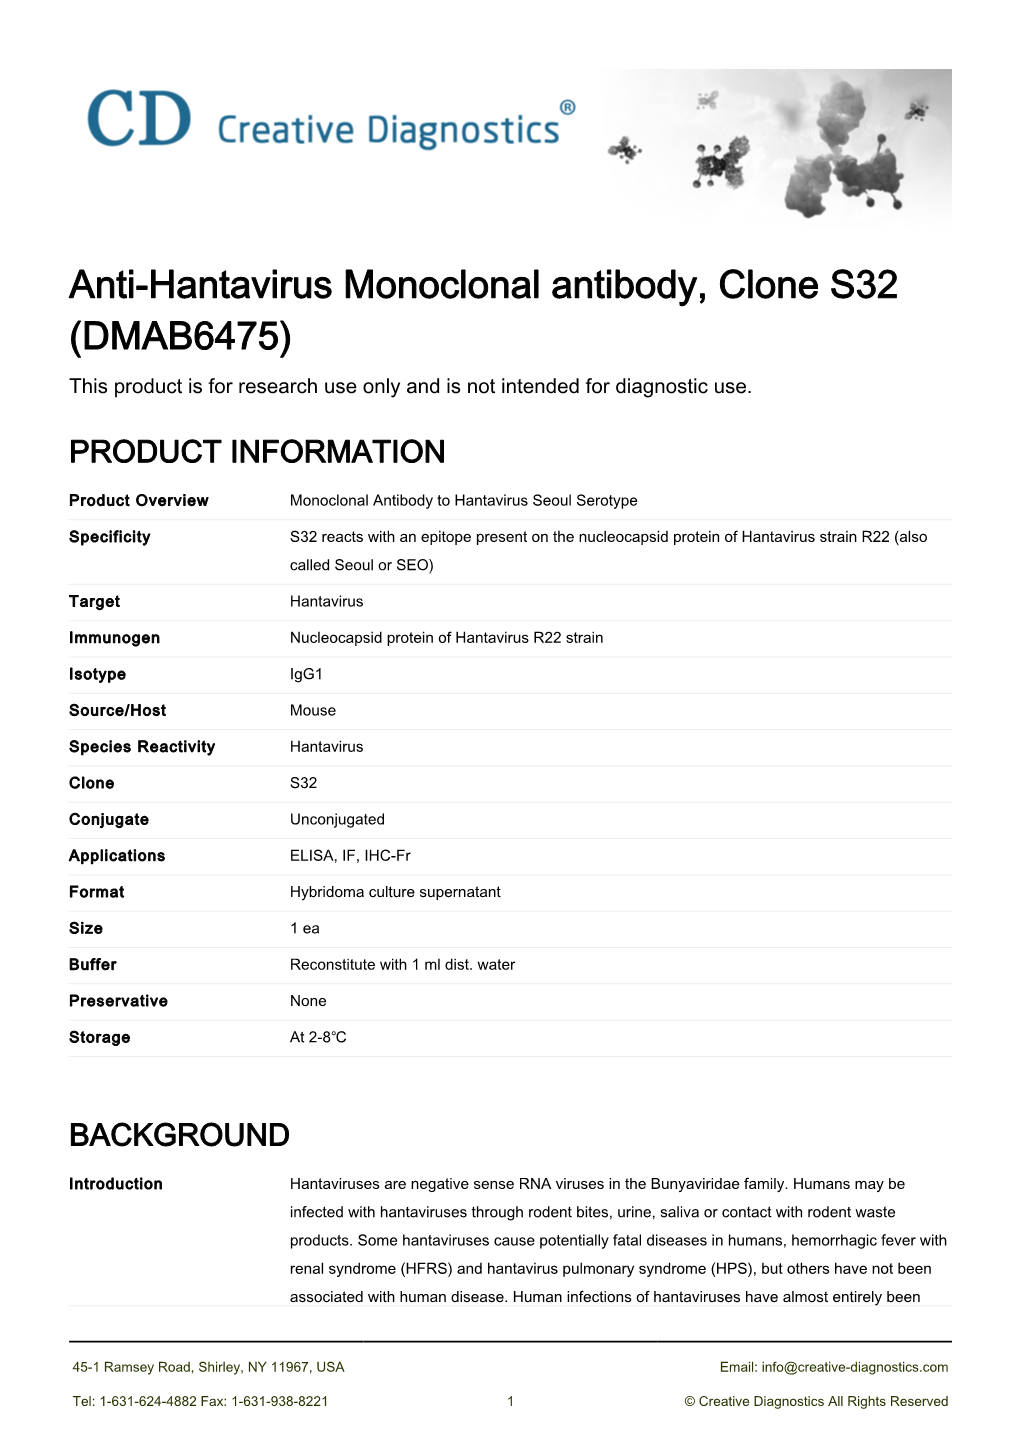 Anti-Hantavirus Monoclonal Antibody, Clone S32 (DMAB6475) This Product Is for Research Use Only and Is Not Intended for Diagnostic Use